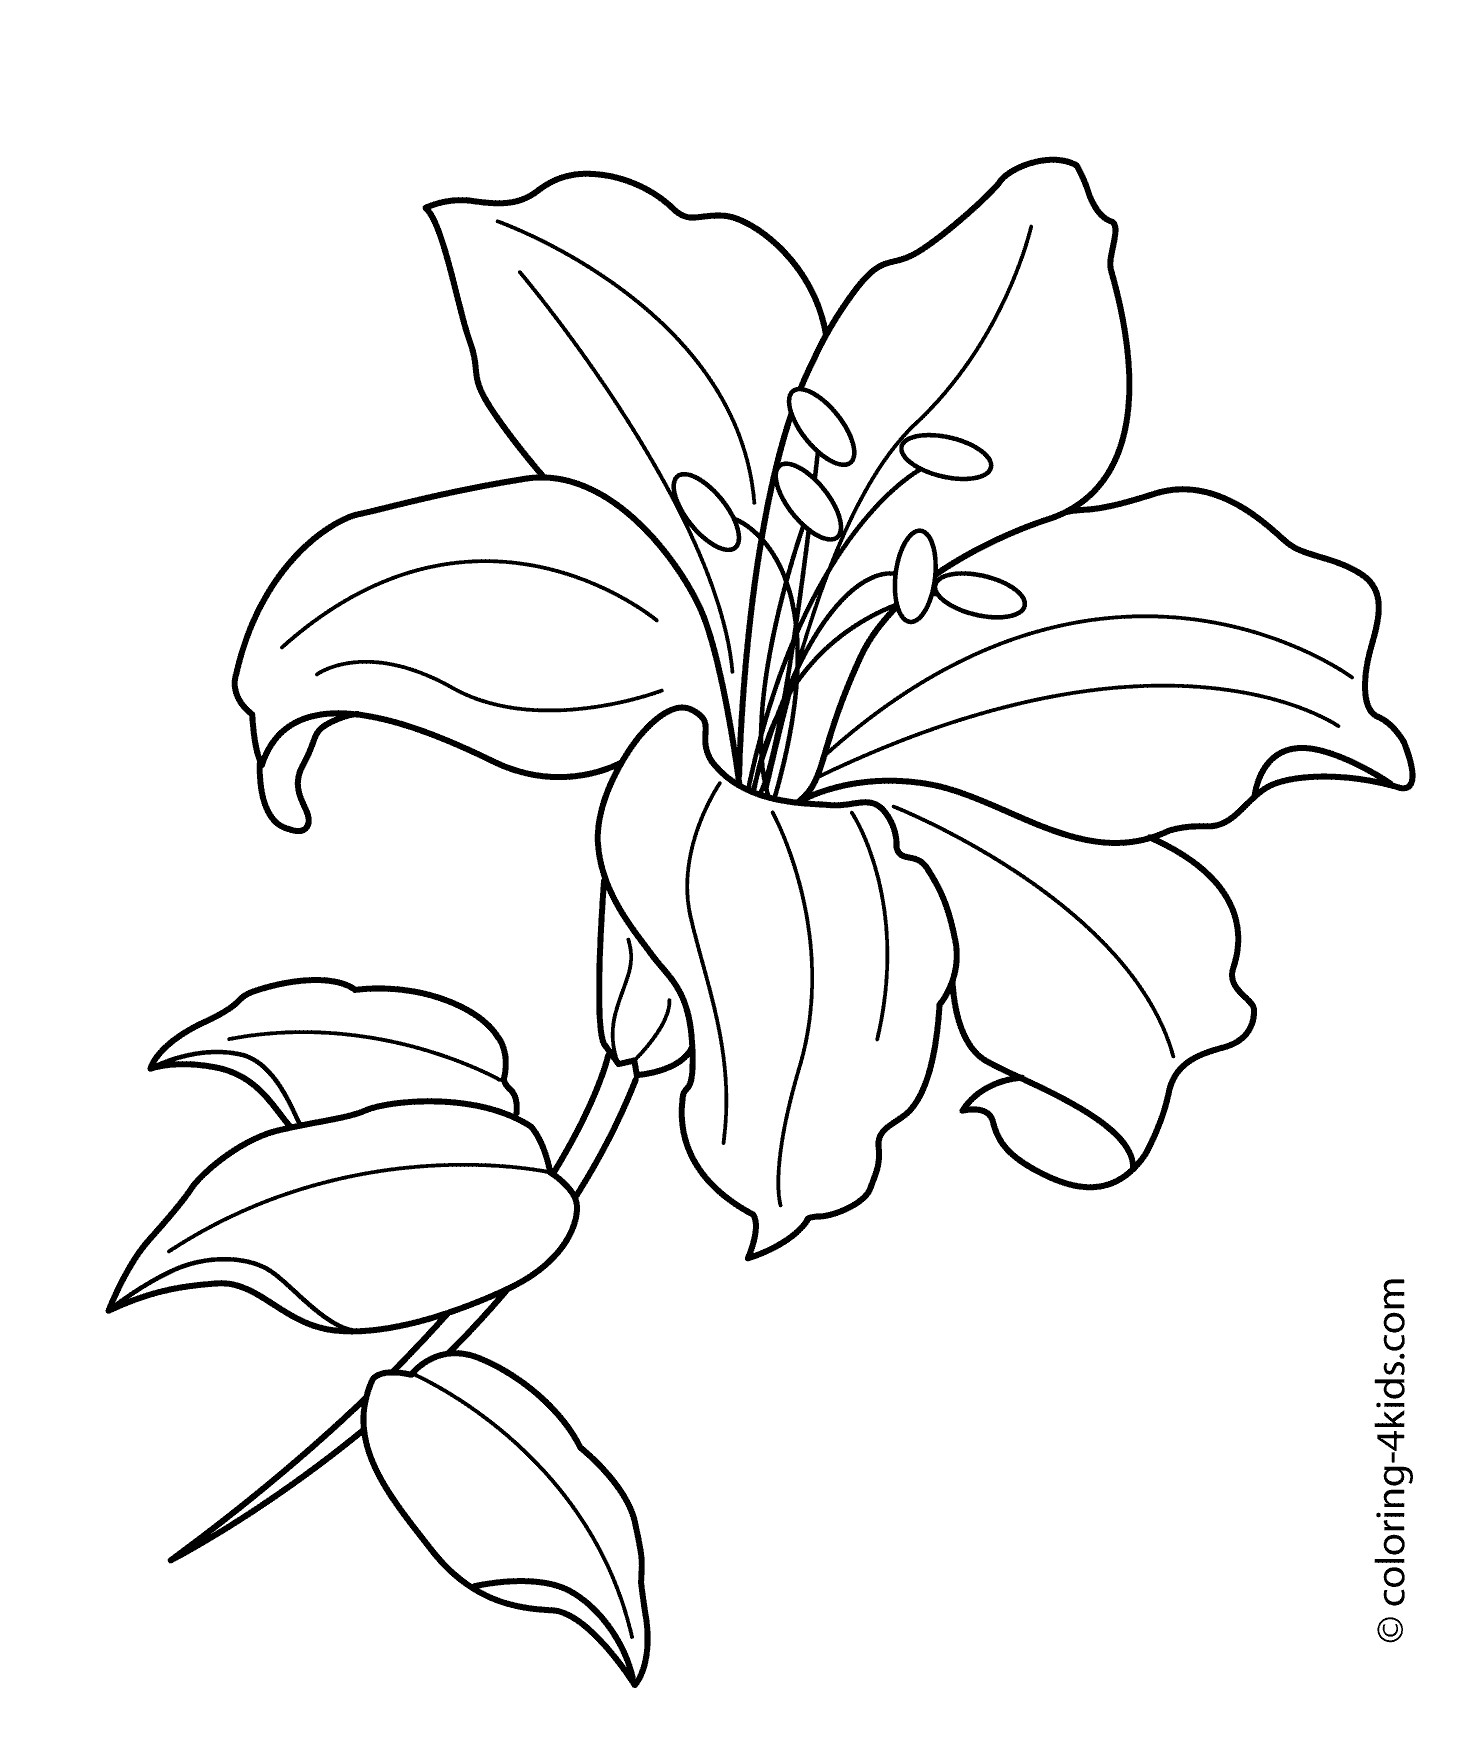 Wedding Flowers Coloring Pages at GetColorings.com | Free ...